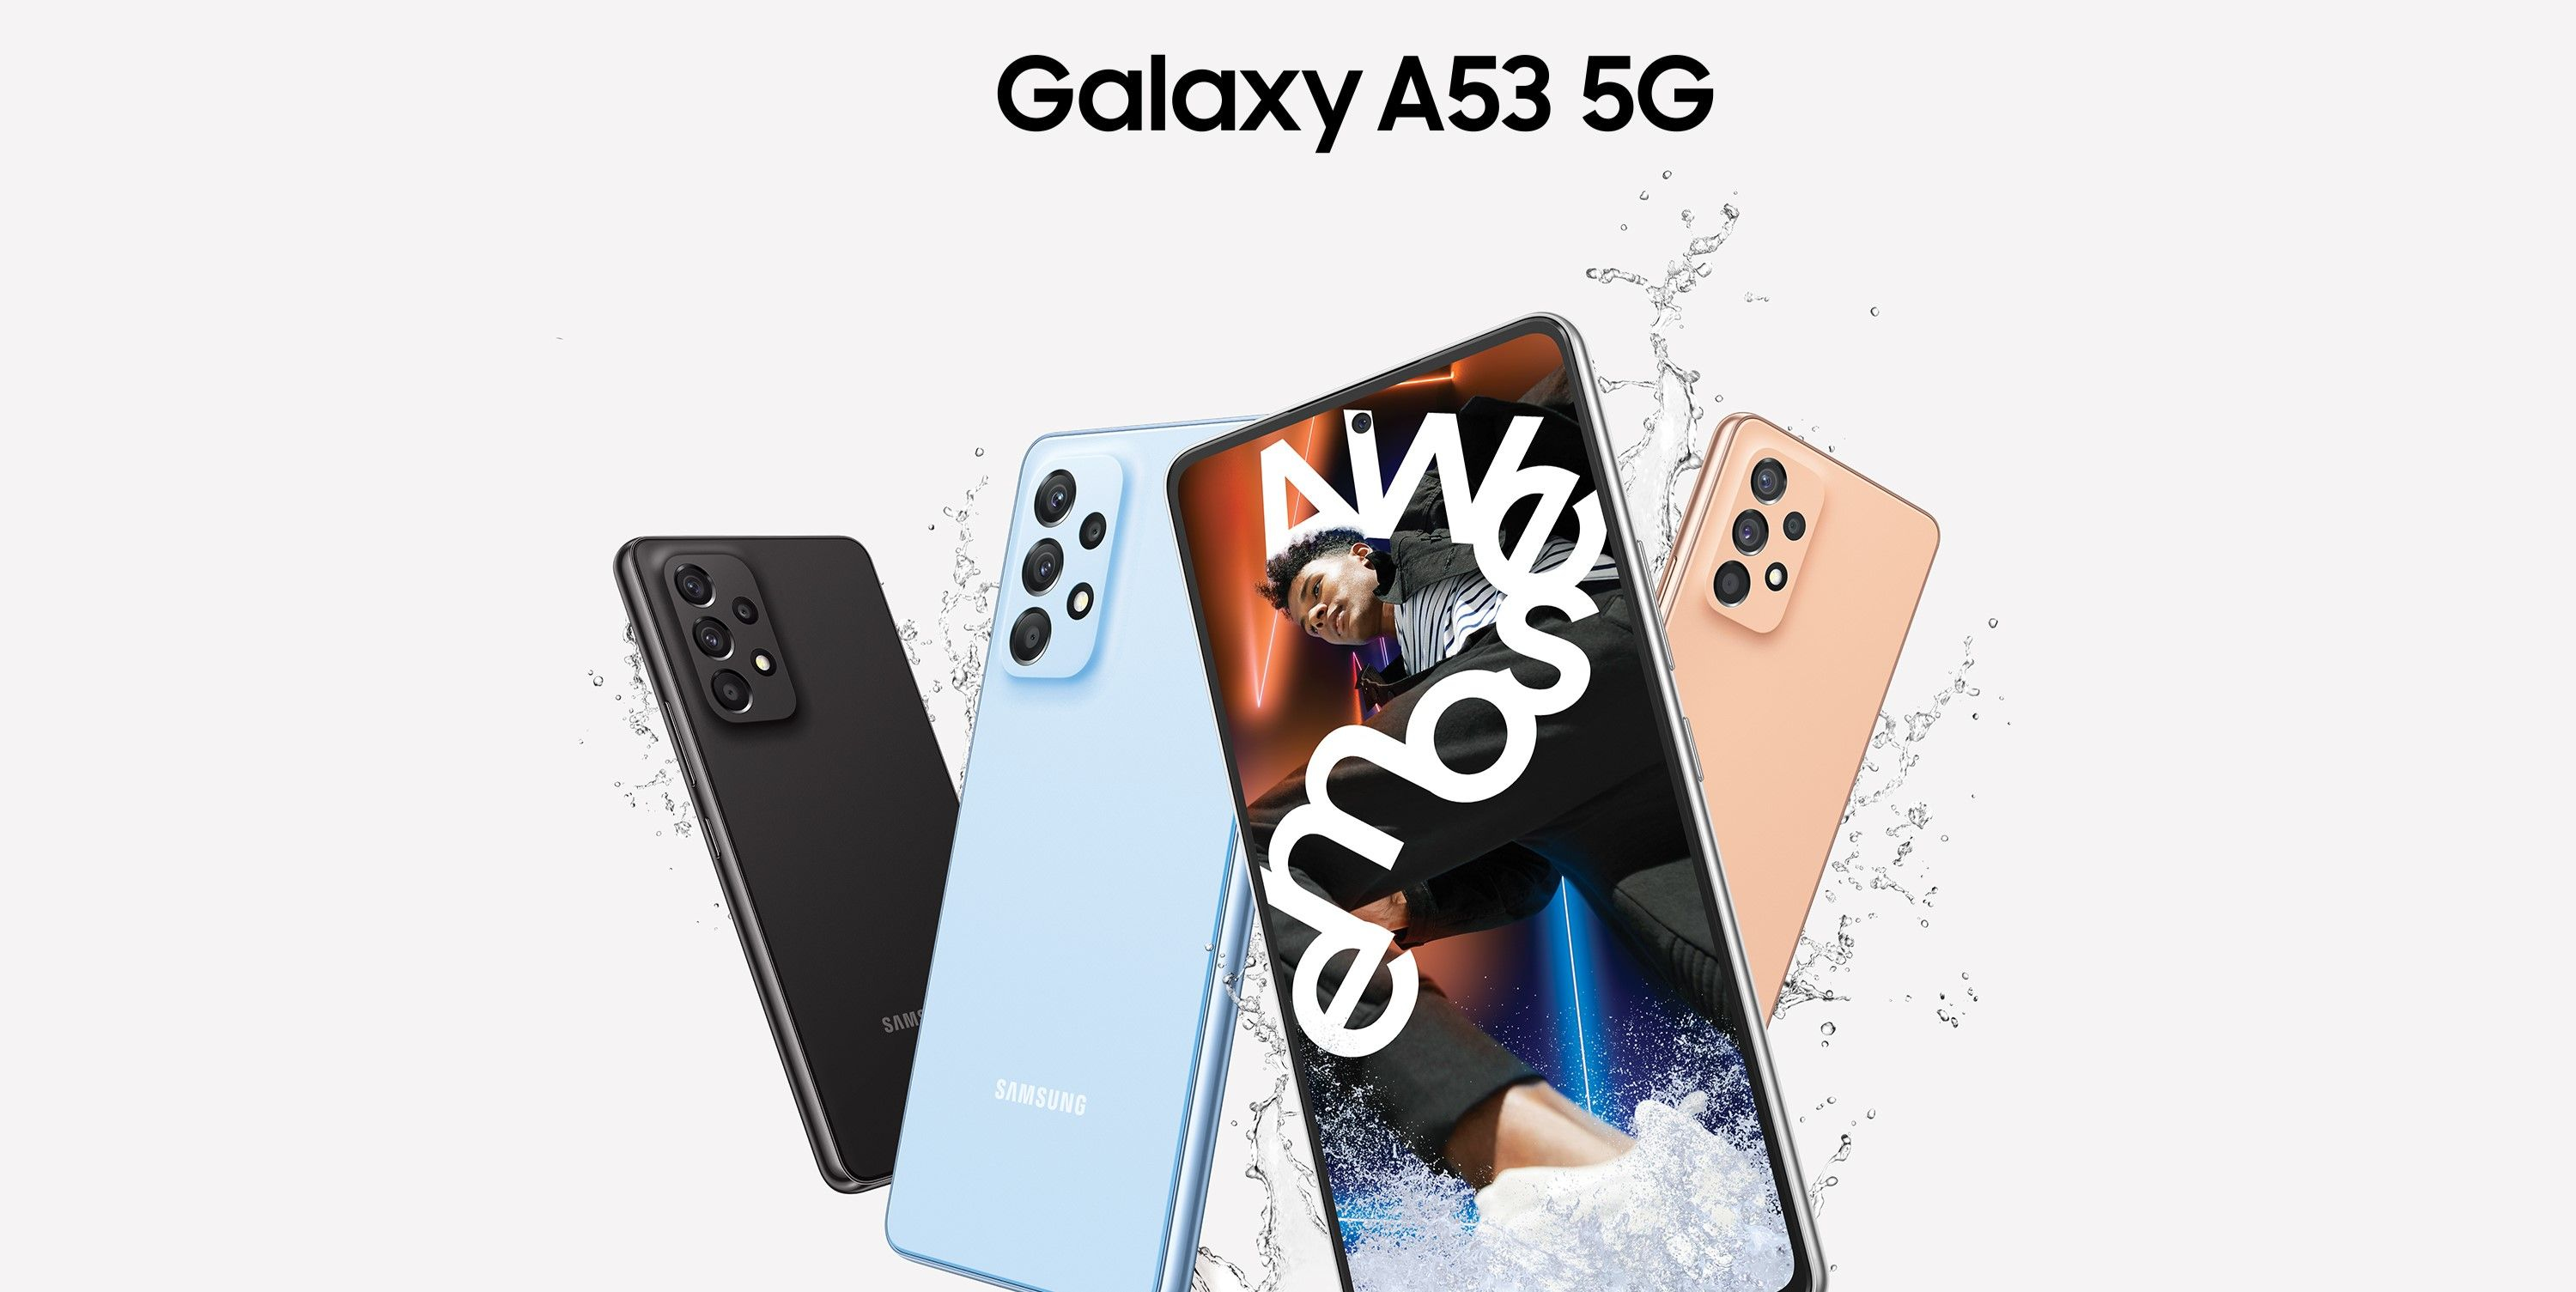 Samsung’s surprise for Galaxy A53 users